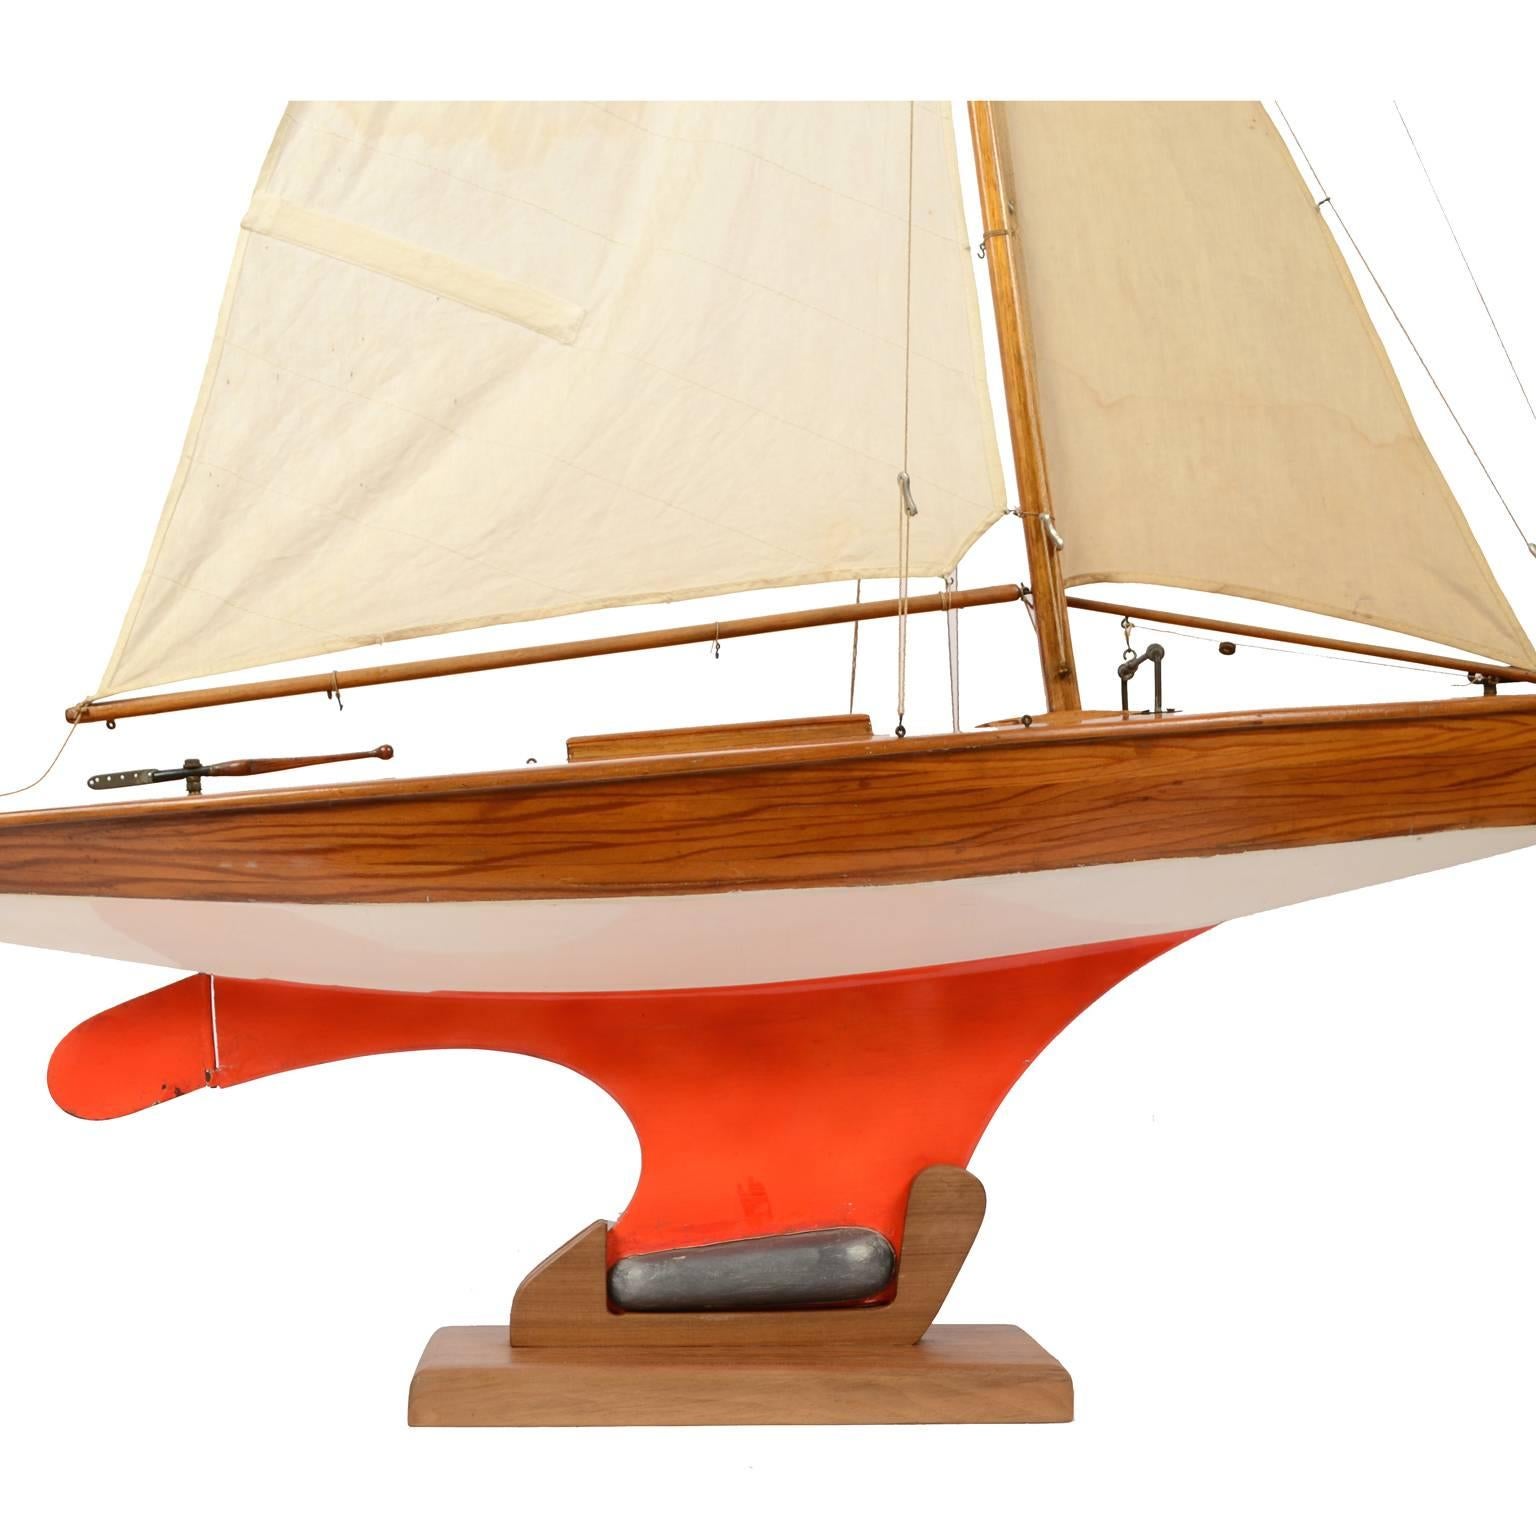 Pond Model on Wooden Base, Red and White Hull Made in the 1950s 5